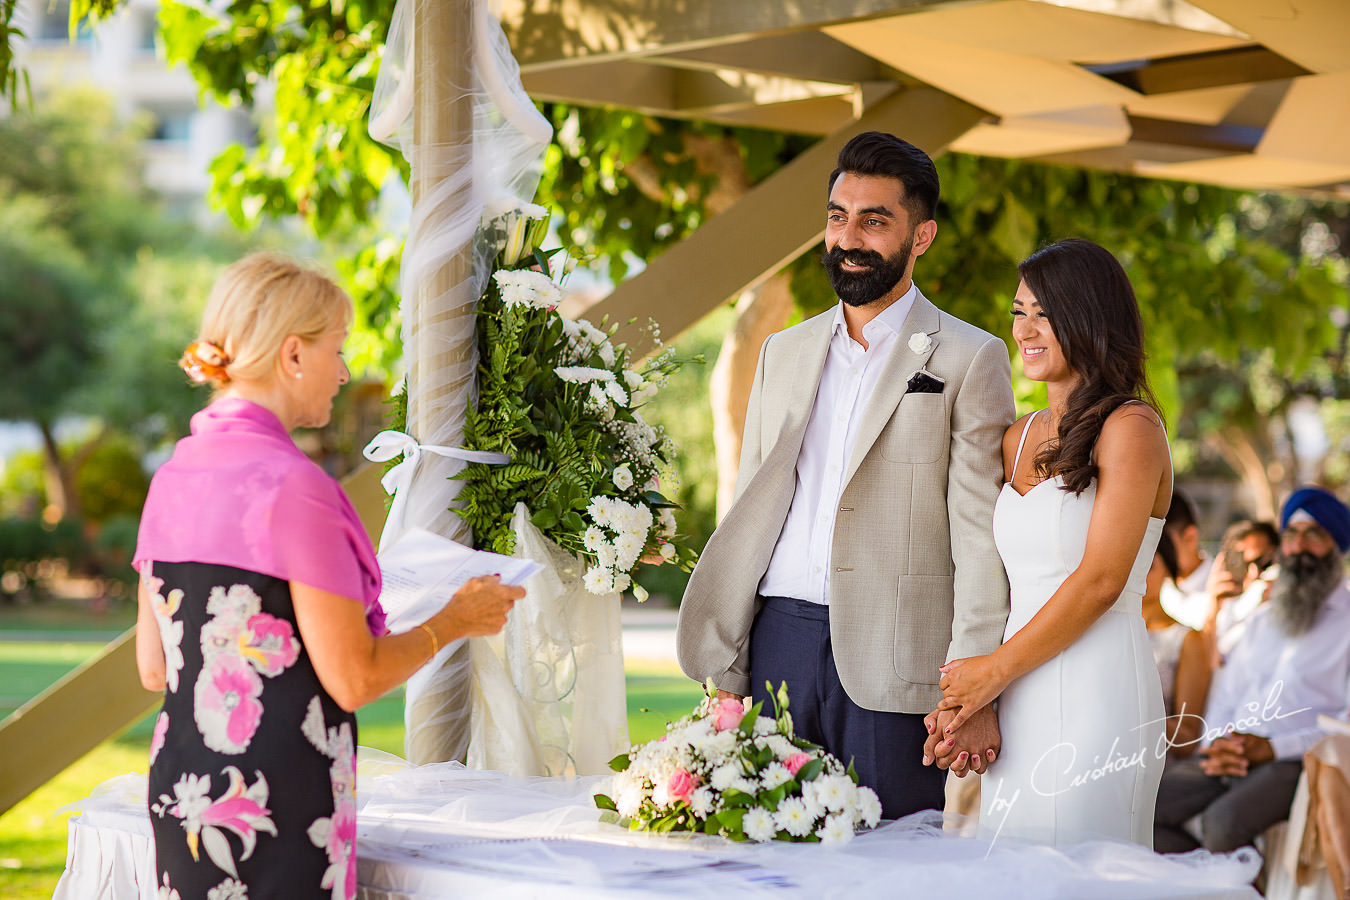 Bride and groom in front of the celebrant, moments photographed by Cristian Dascalu at Athena Beach Hotel in Paphos, Cyprus, during a symbolic wedding.